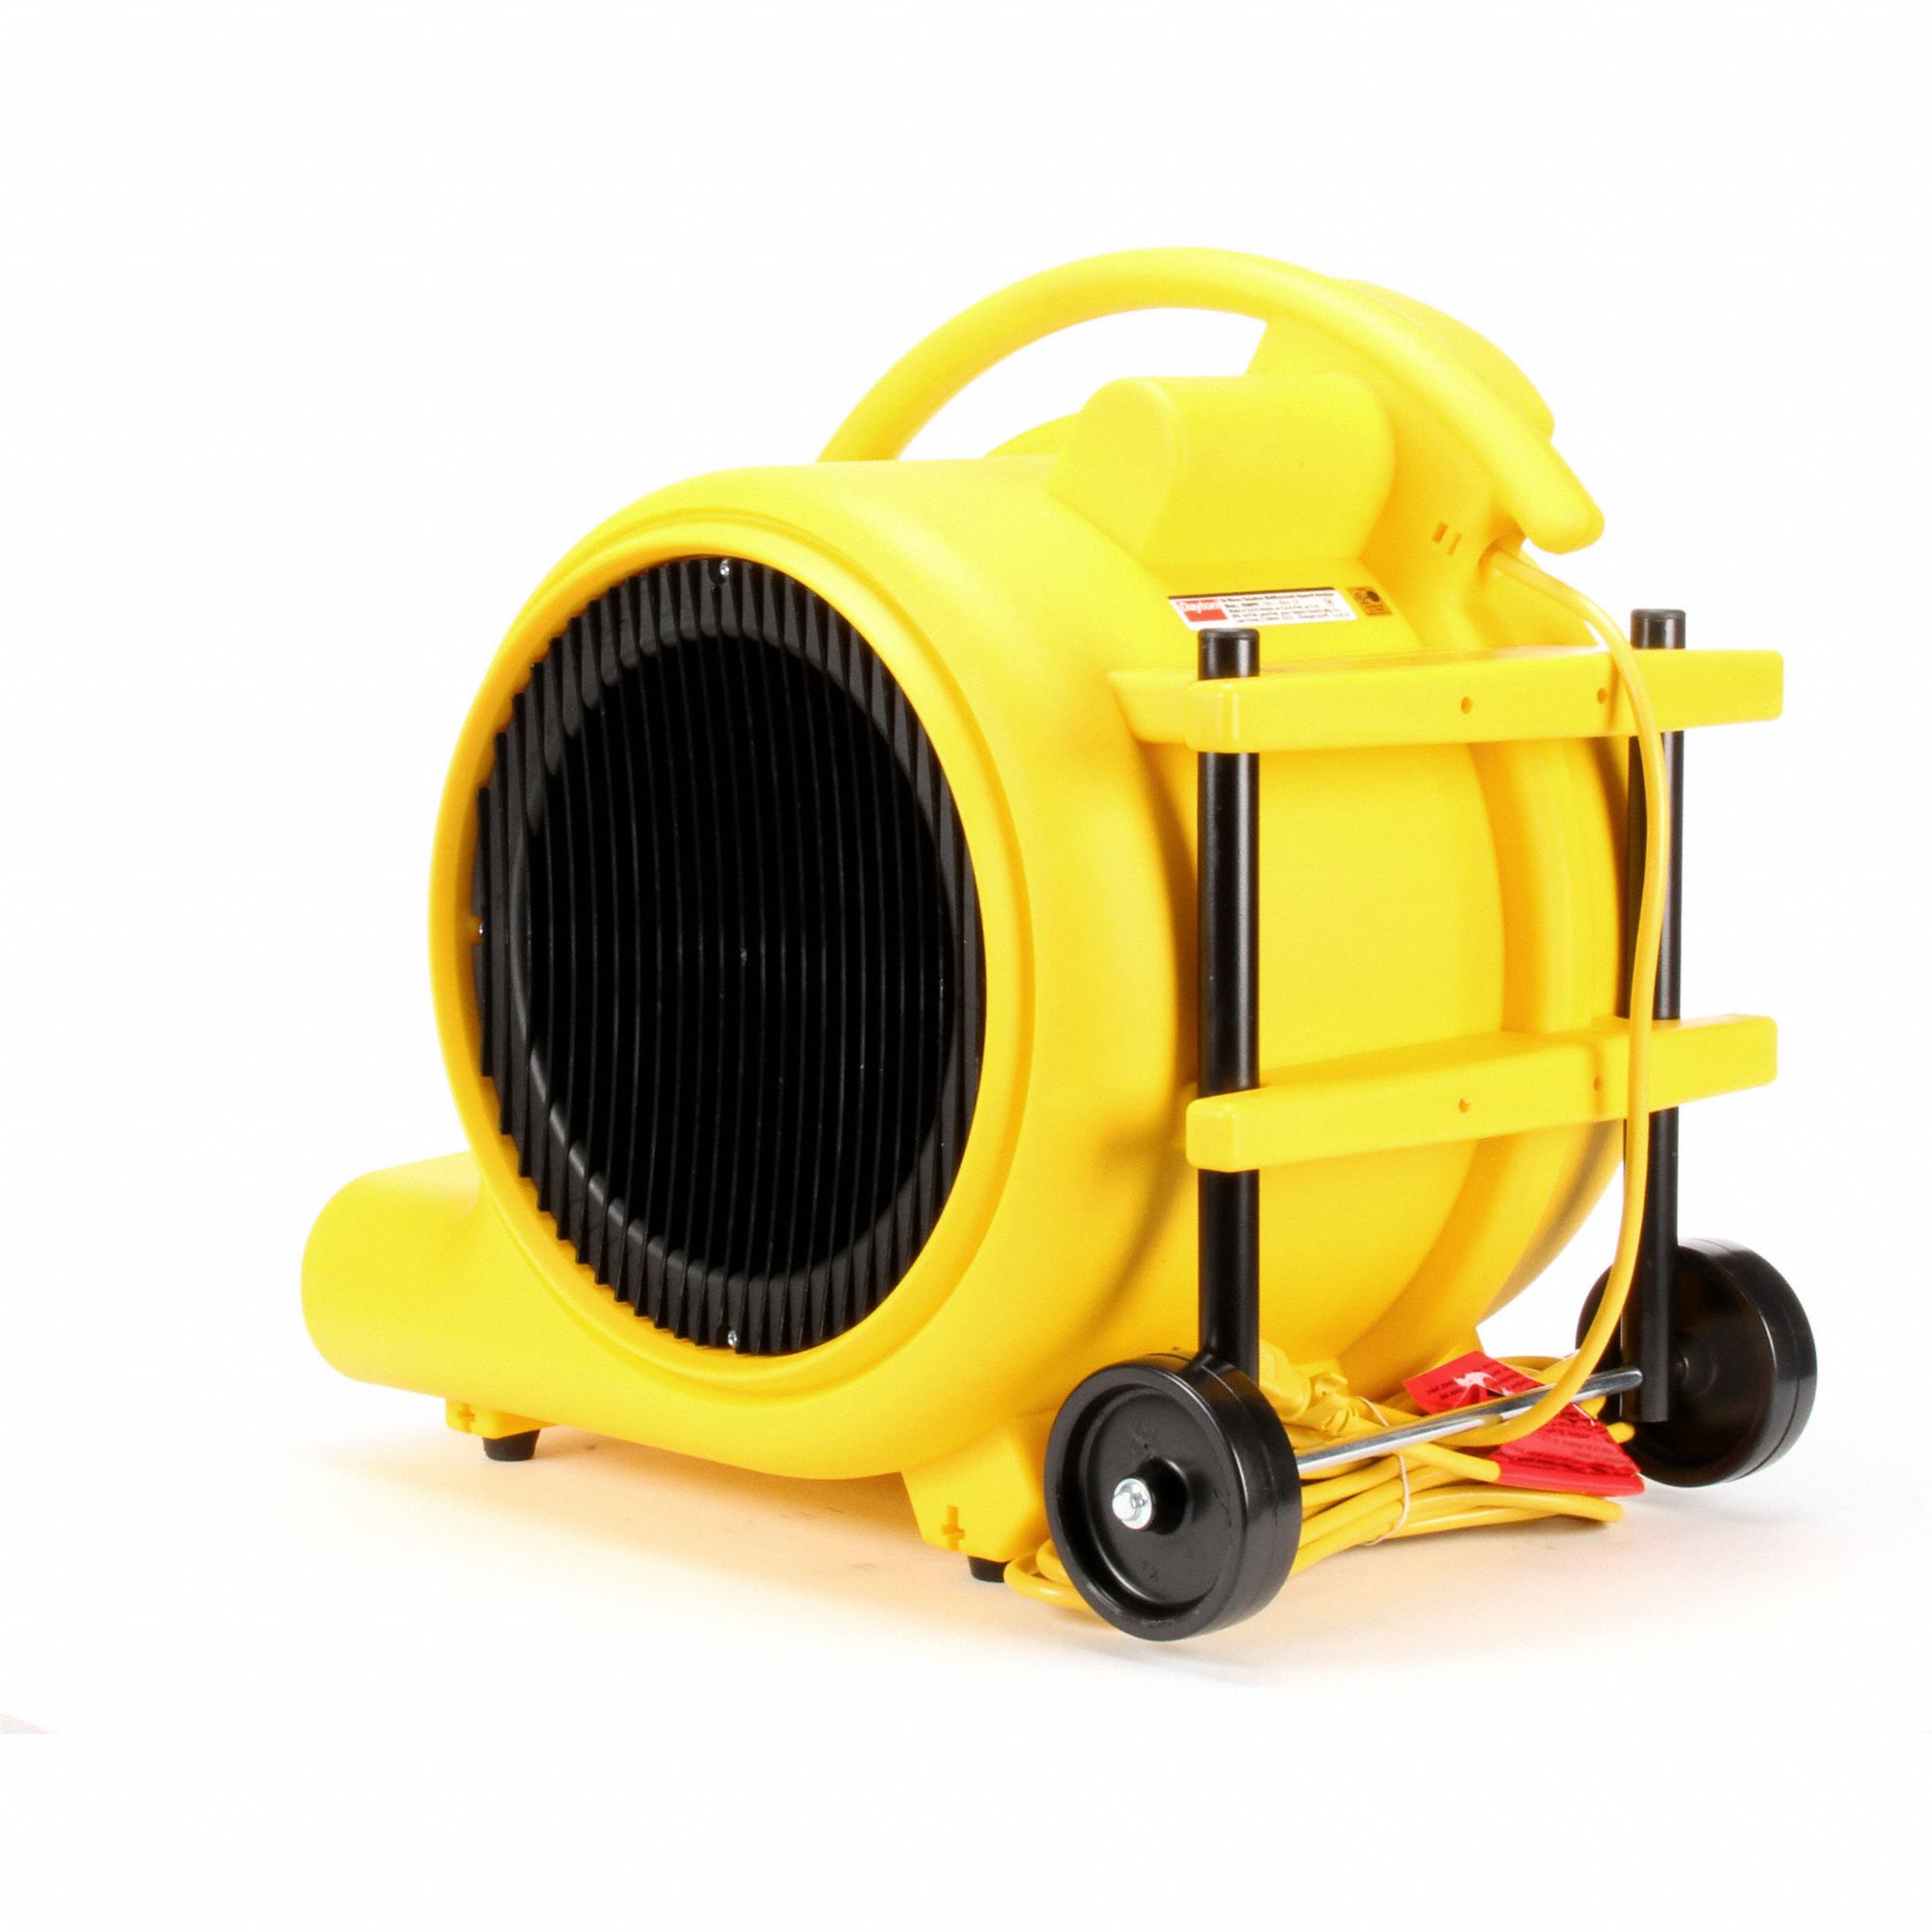 Dropship VEVOR Floor Blower, 1/2 HP, 2600 CFM Air Mover For Drying And  Cooling, Portable